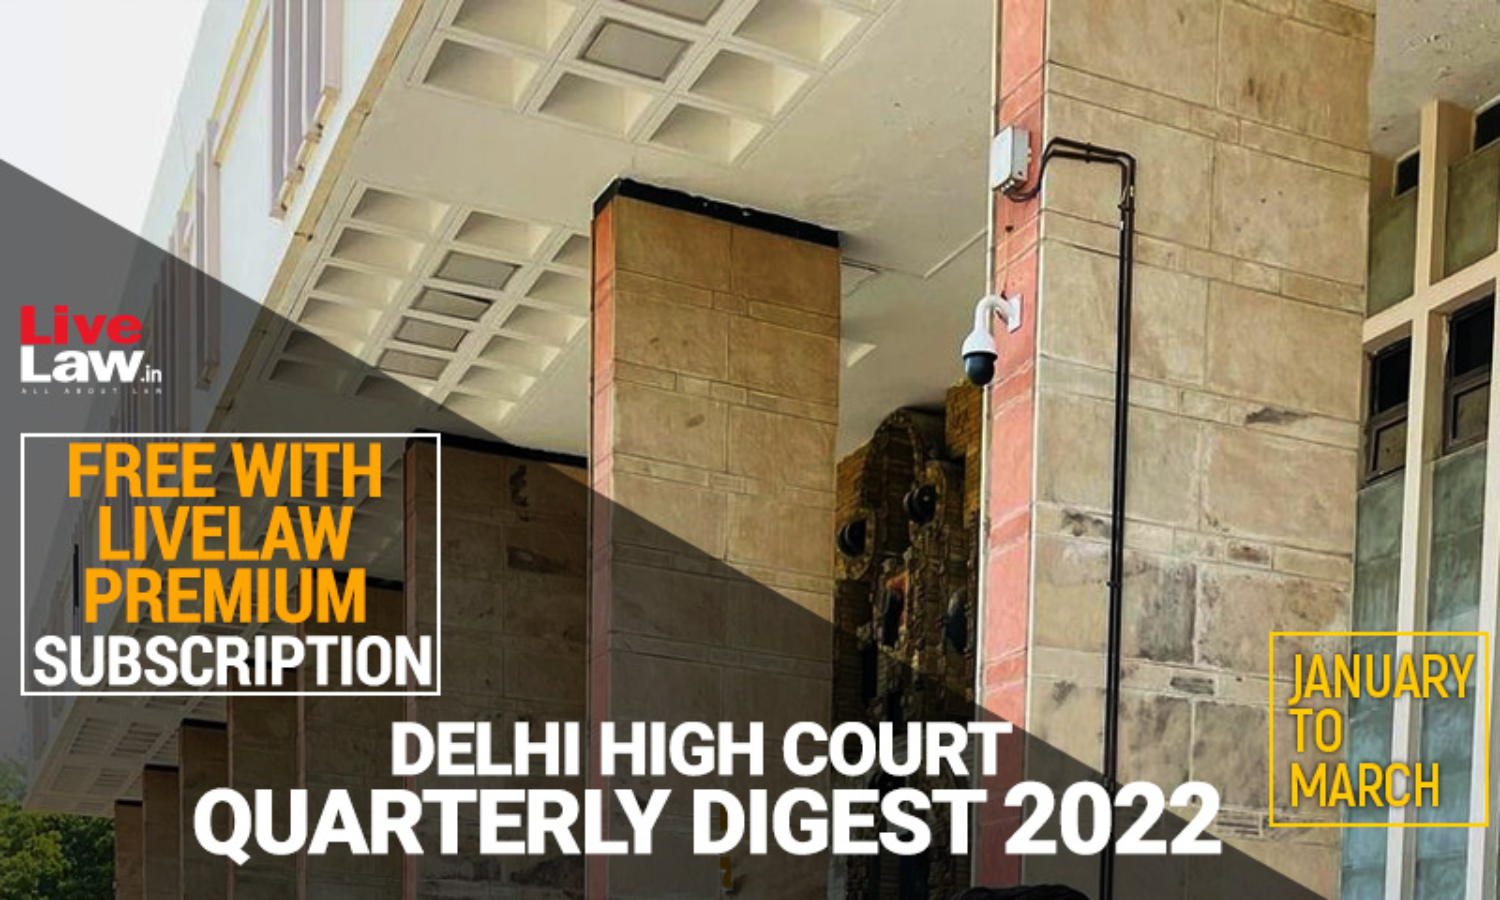 Delhi High Court Quarterly Digest: January To March 2022